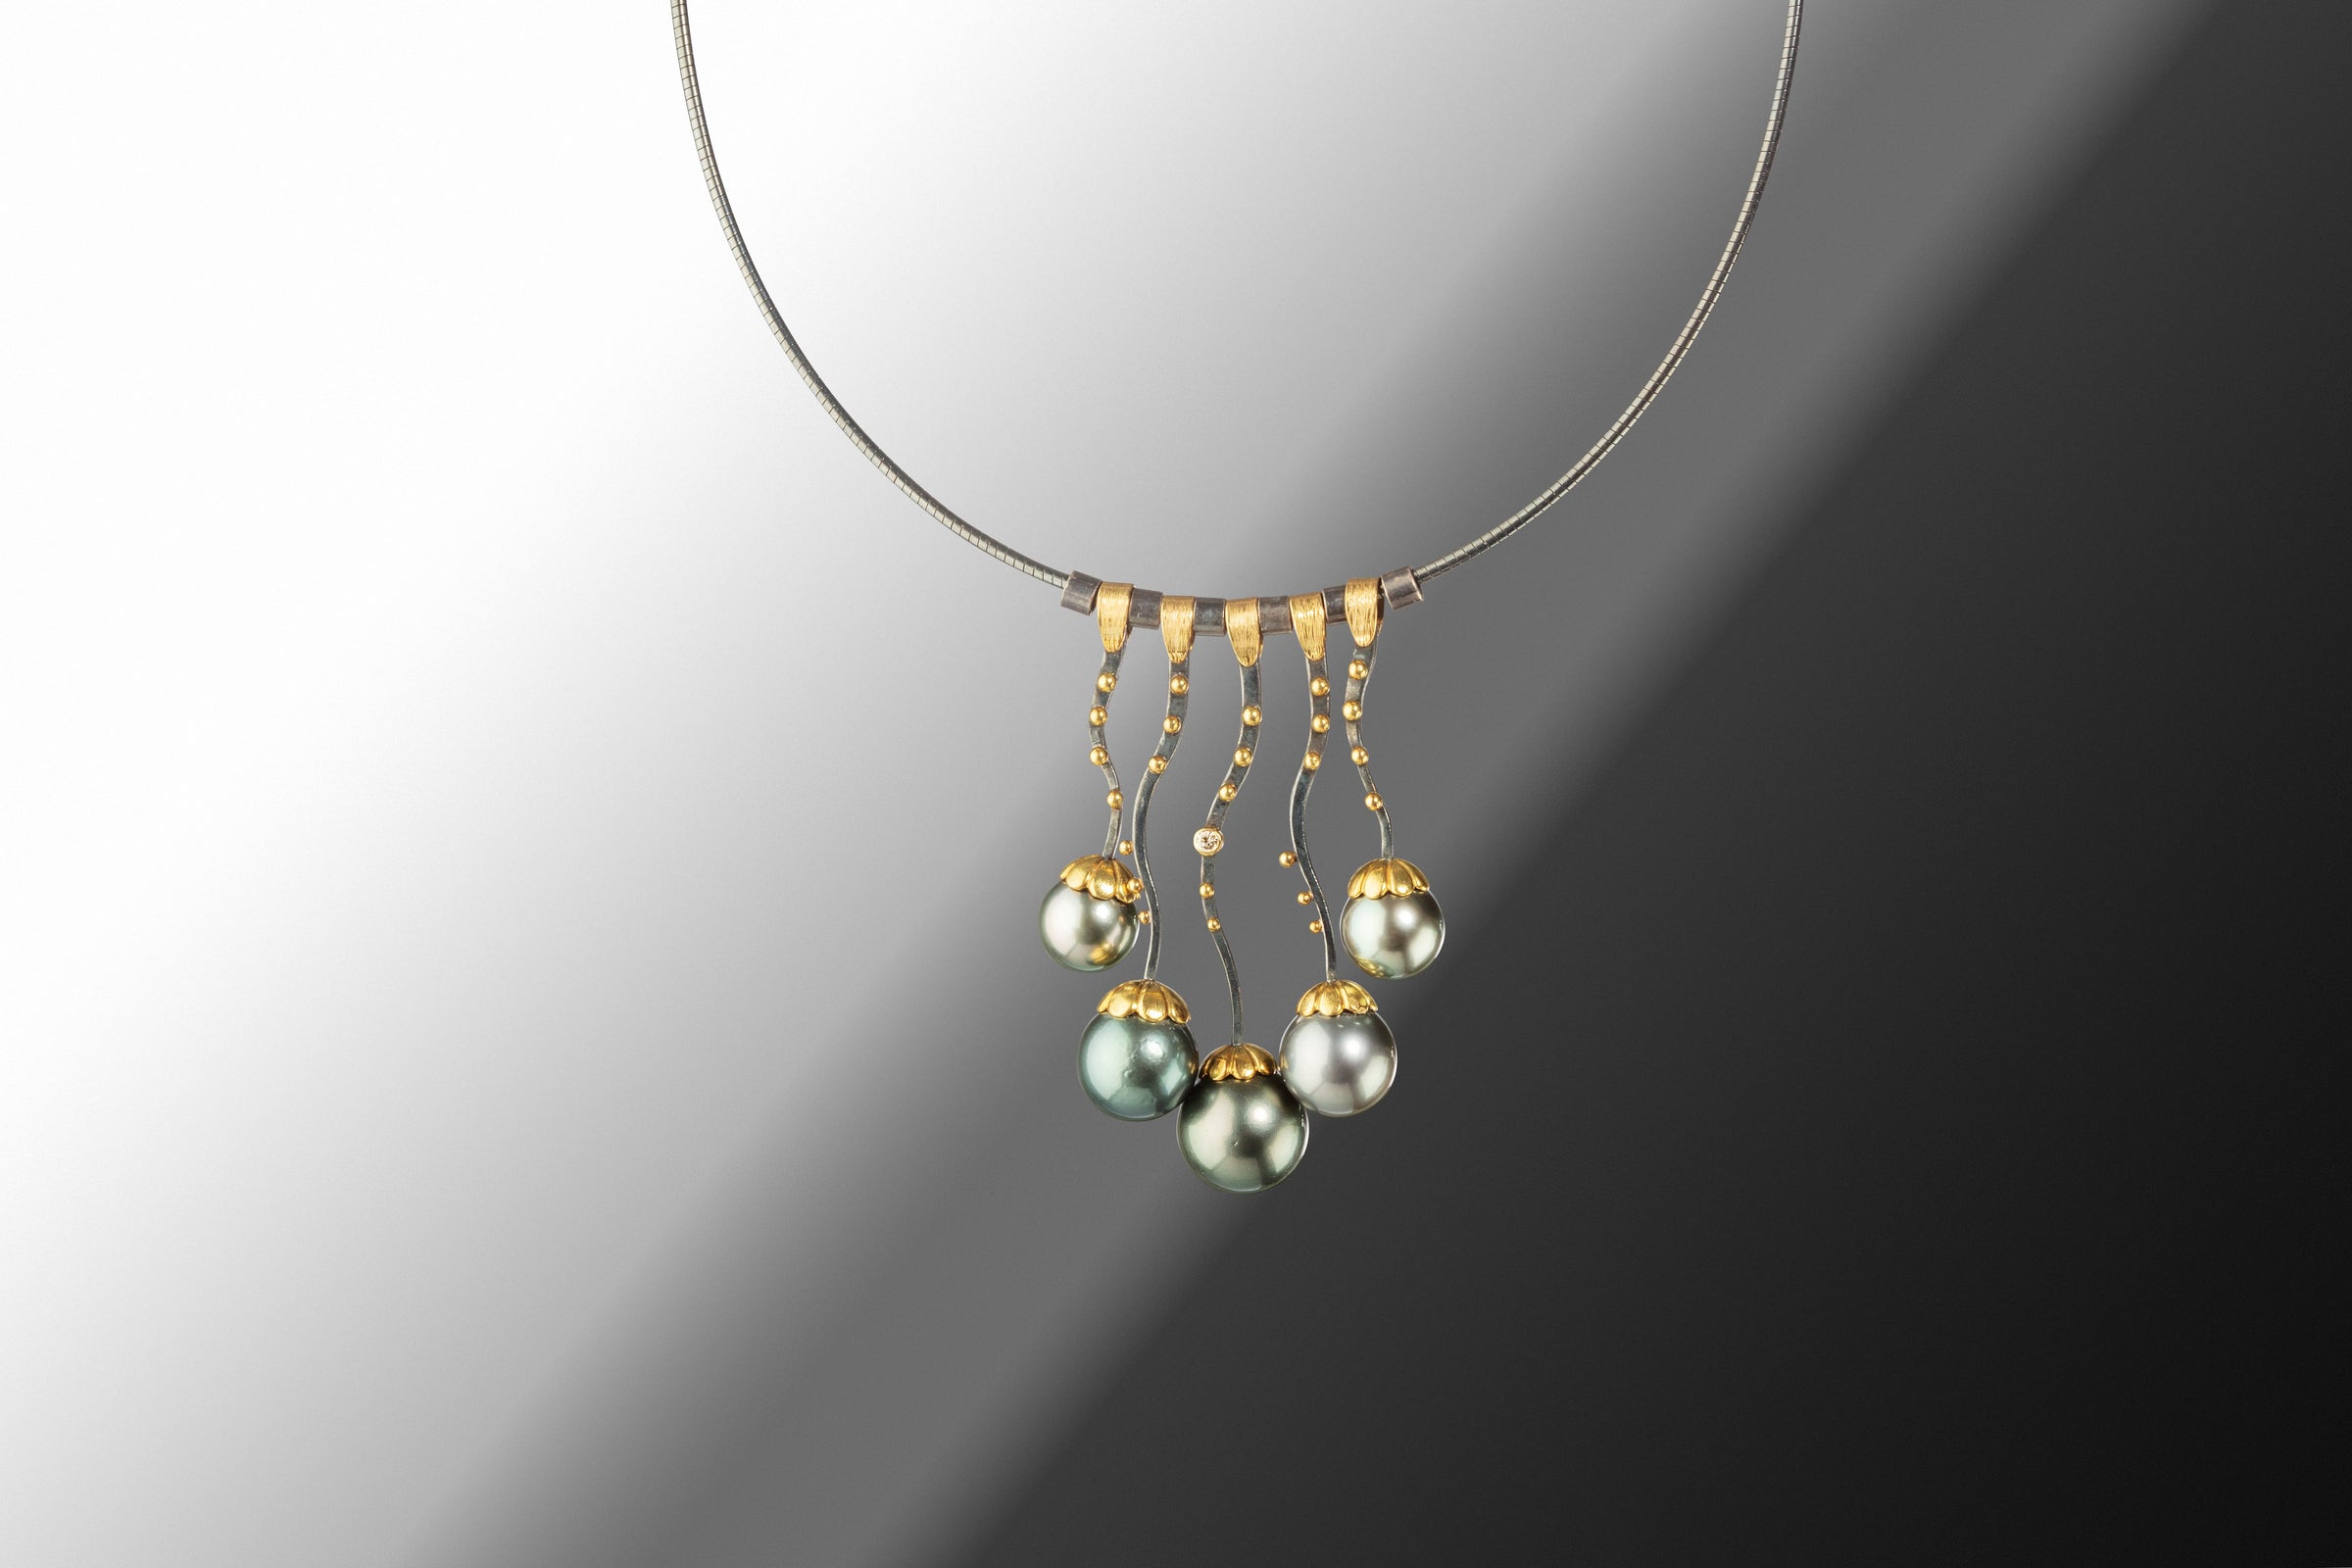 tahitian pearl necklace with 14K yellow gold and oxidized silver